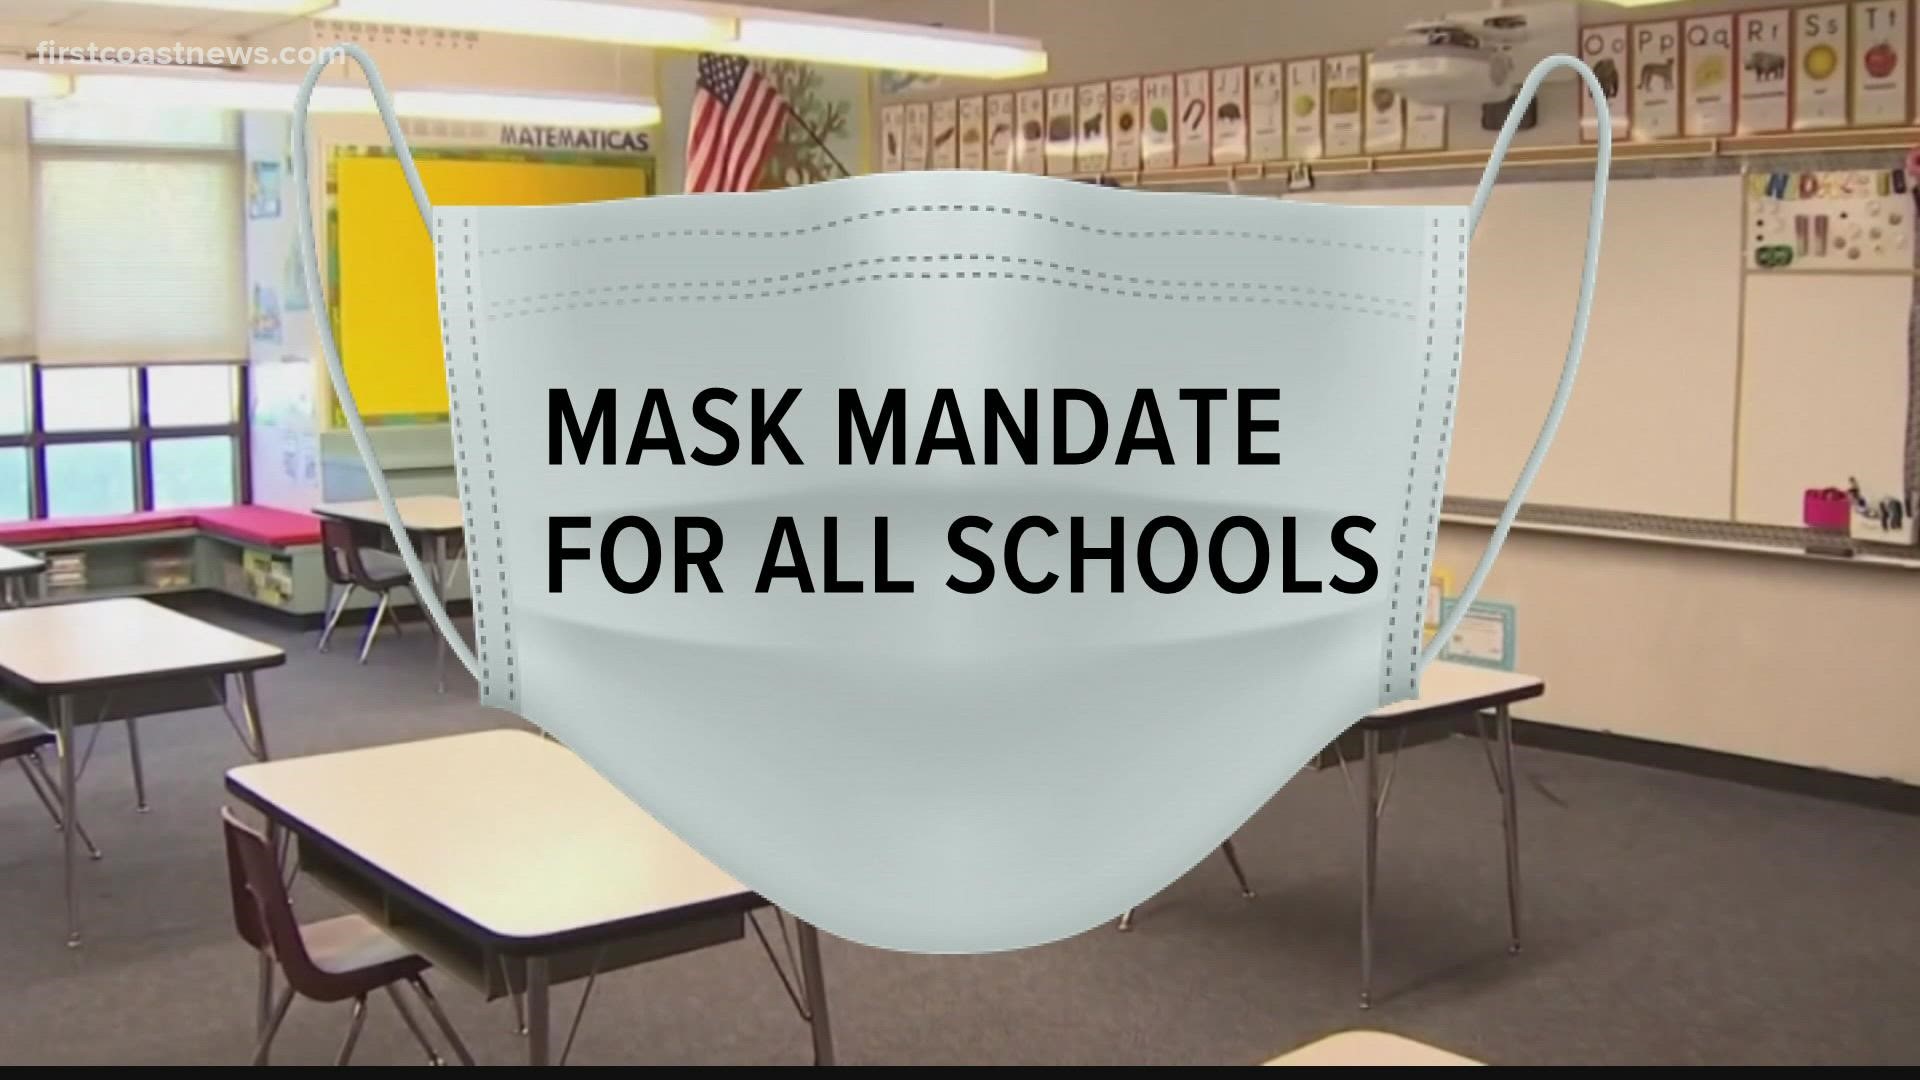 The doctors want a mask mandate for all students at all public schools.